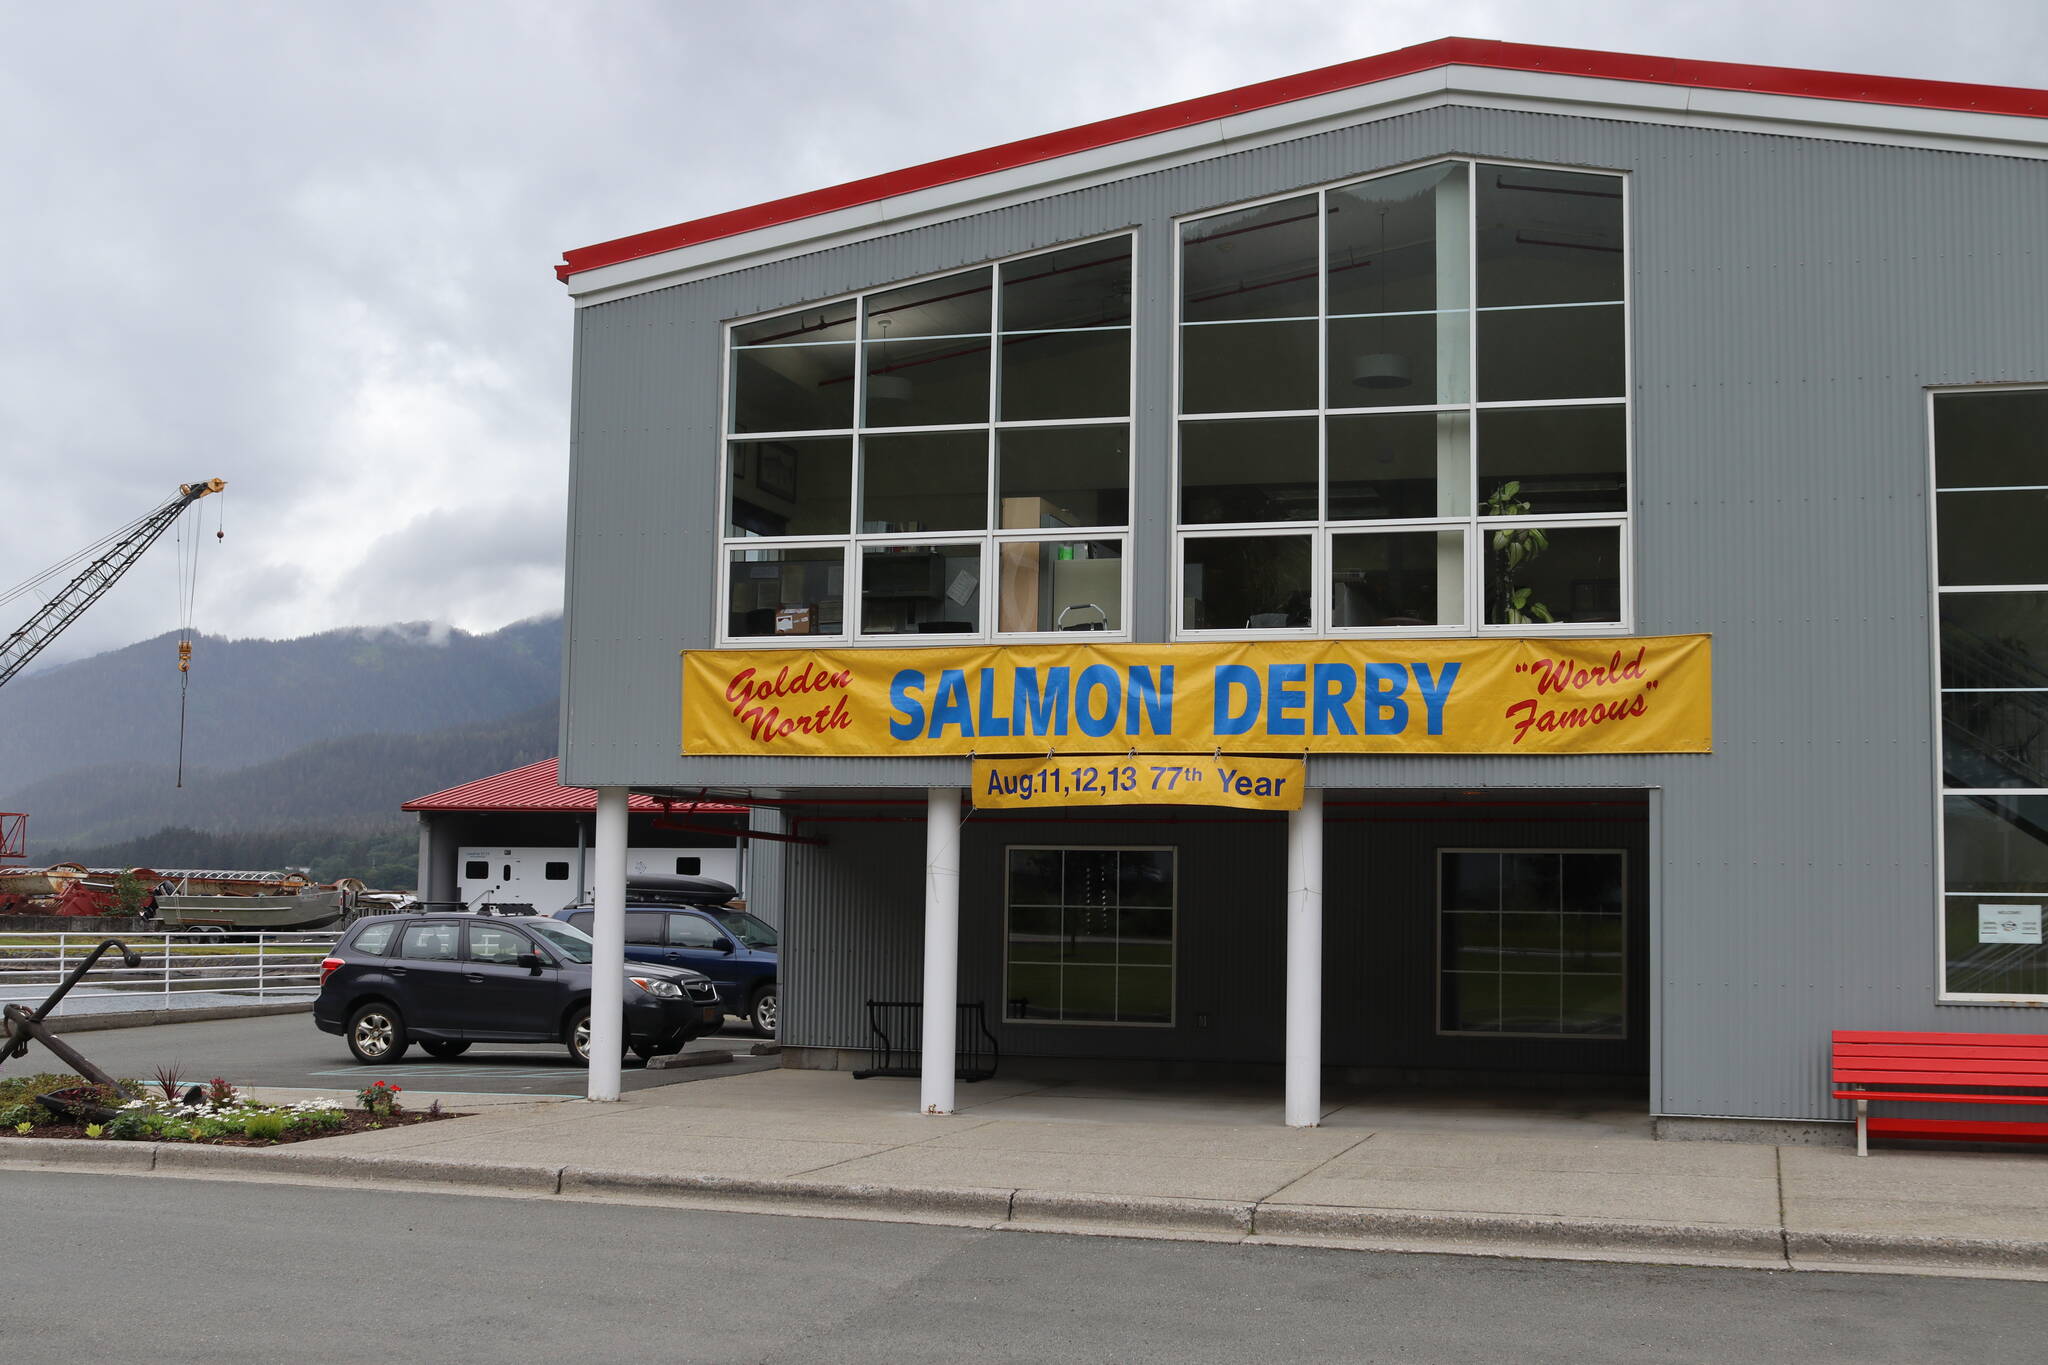 The Golden North Salmon Derby returns this weekend for the 77th edition as the same charitable event, with bigger prizes. (Meredith Jordan / Juneau Empire)